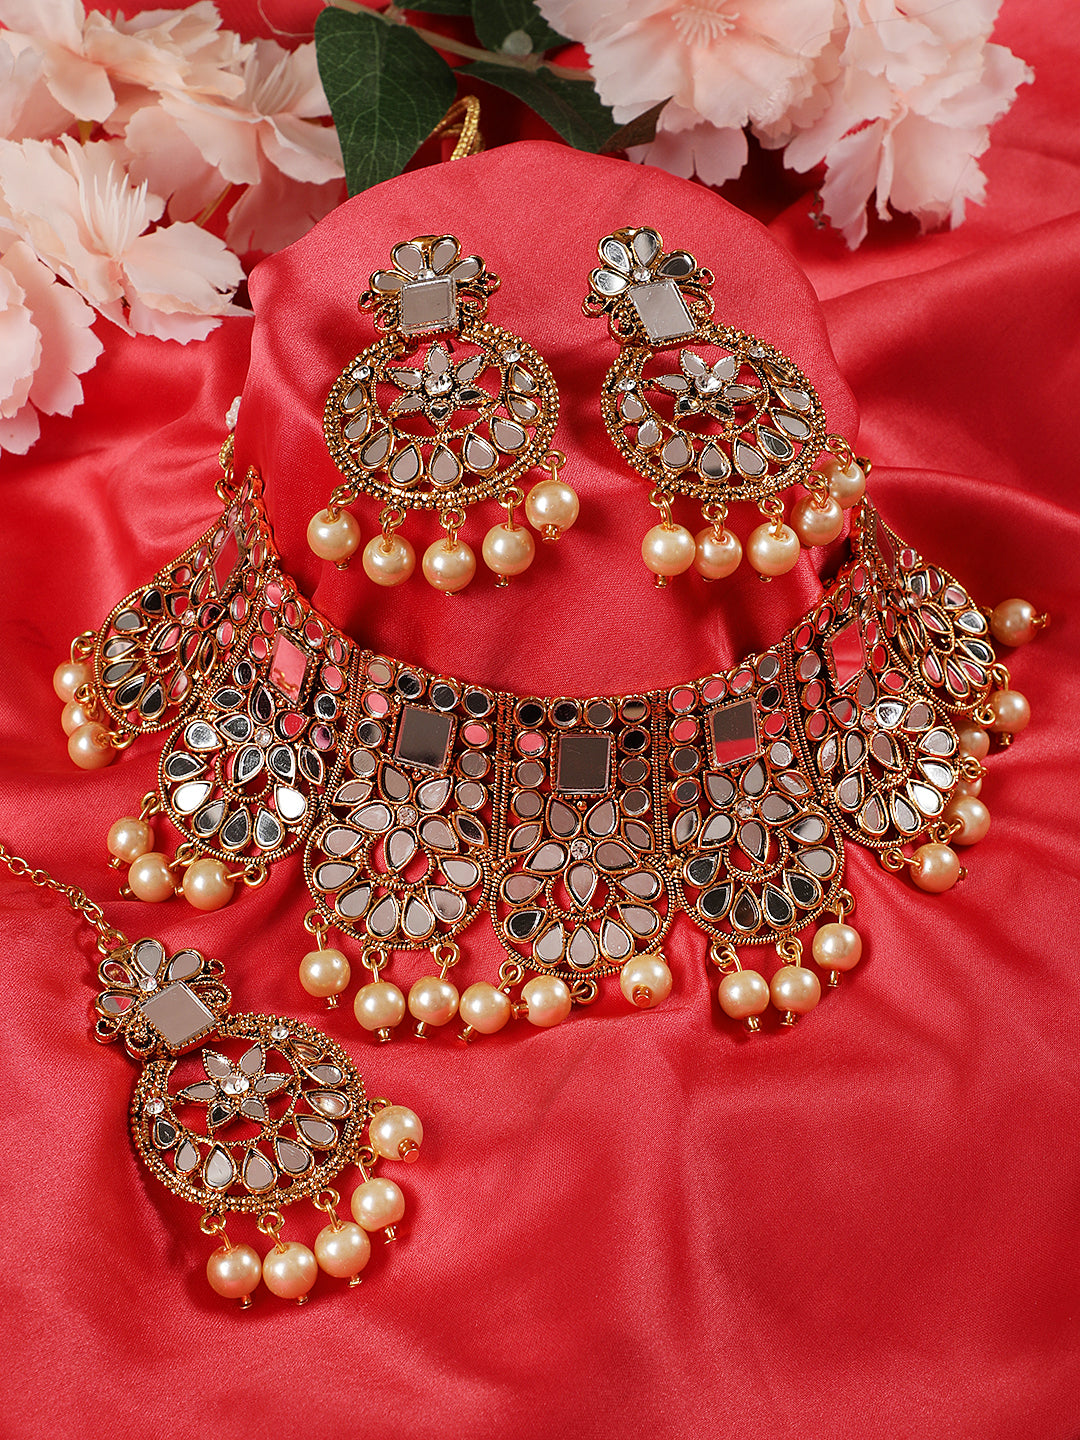 Gold-Plated White Coloured Stone-Studded & Cream Pearl Beaded Handcrafted Jewellery Set - Jazzandsizzle